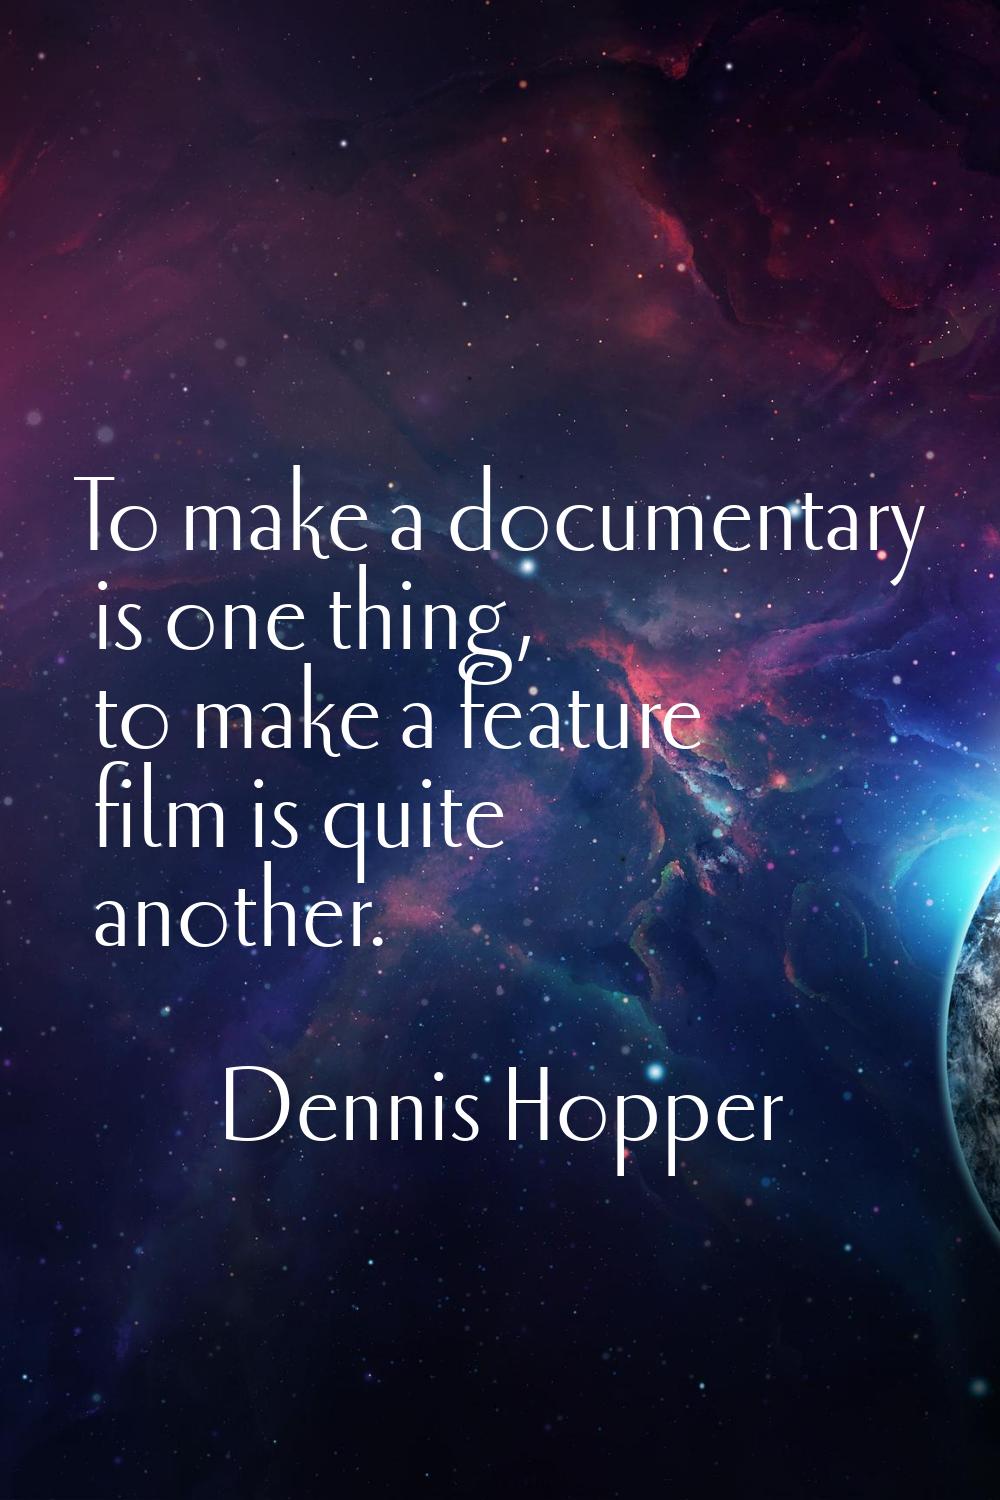 To make a documentary is one thing, to make a feature film is quite another.